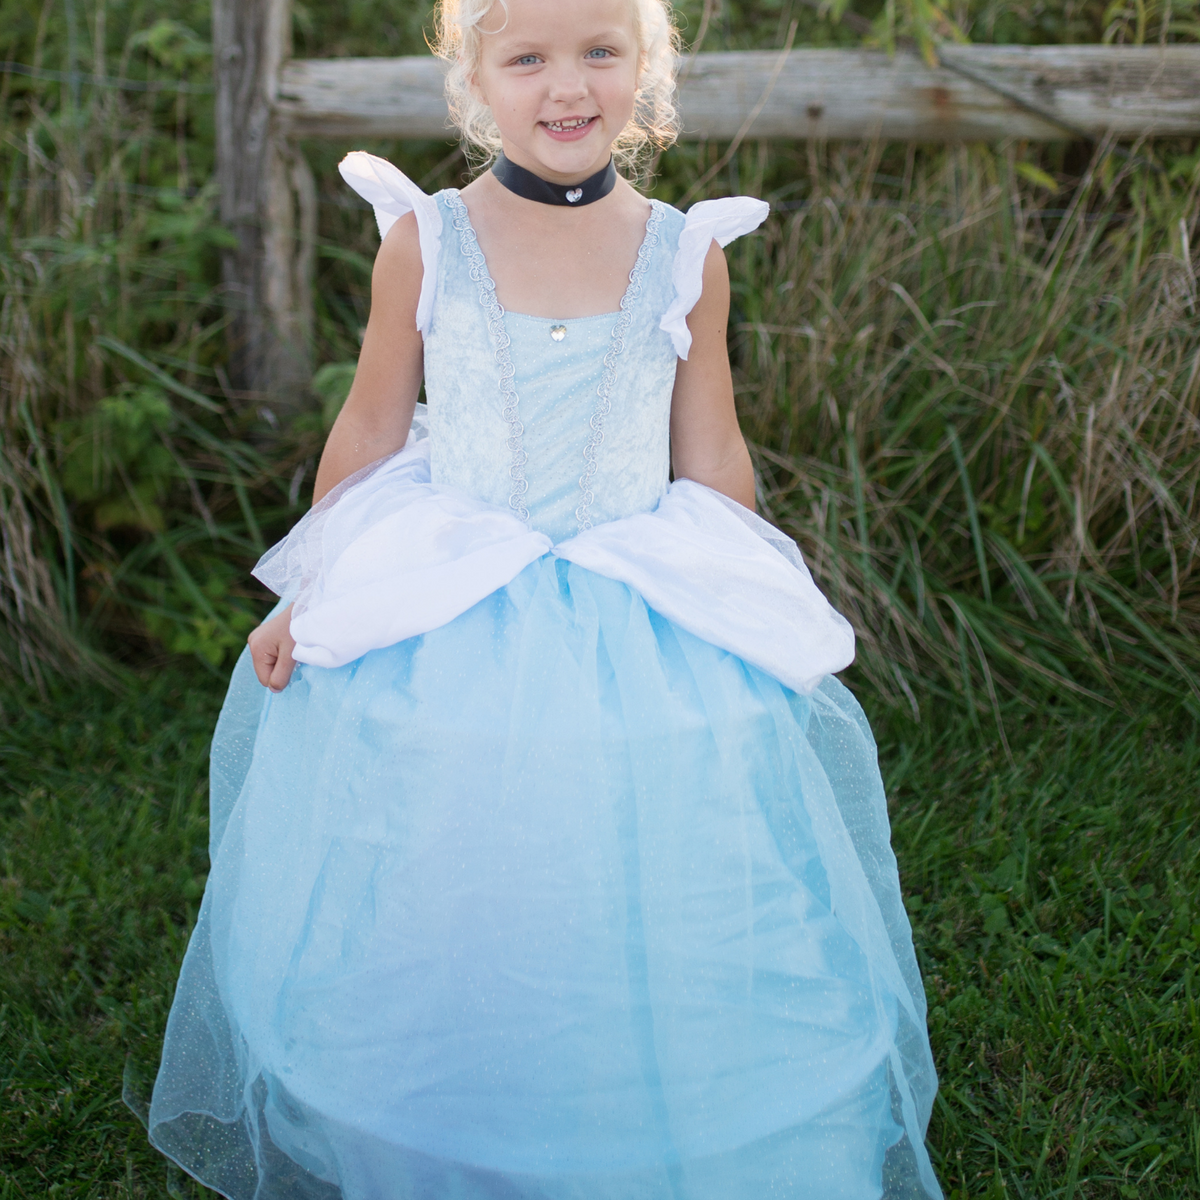 New Year's Eve Fancy Dress | Disney's Cinderella In Rags - Not Dressed As  Lamb